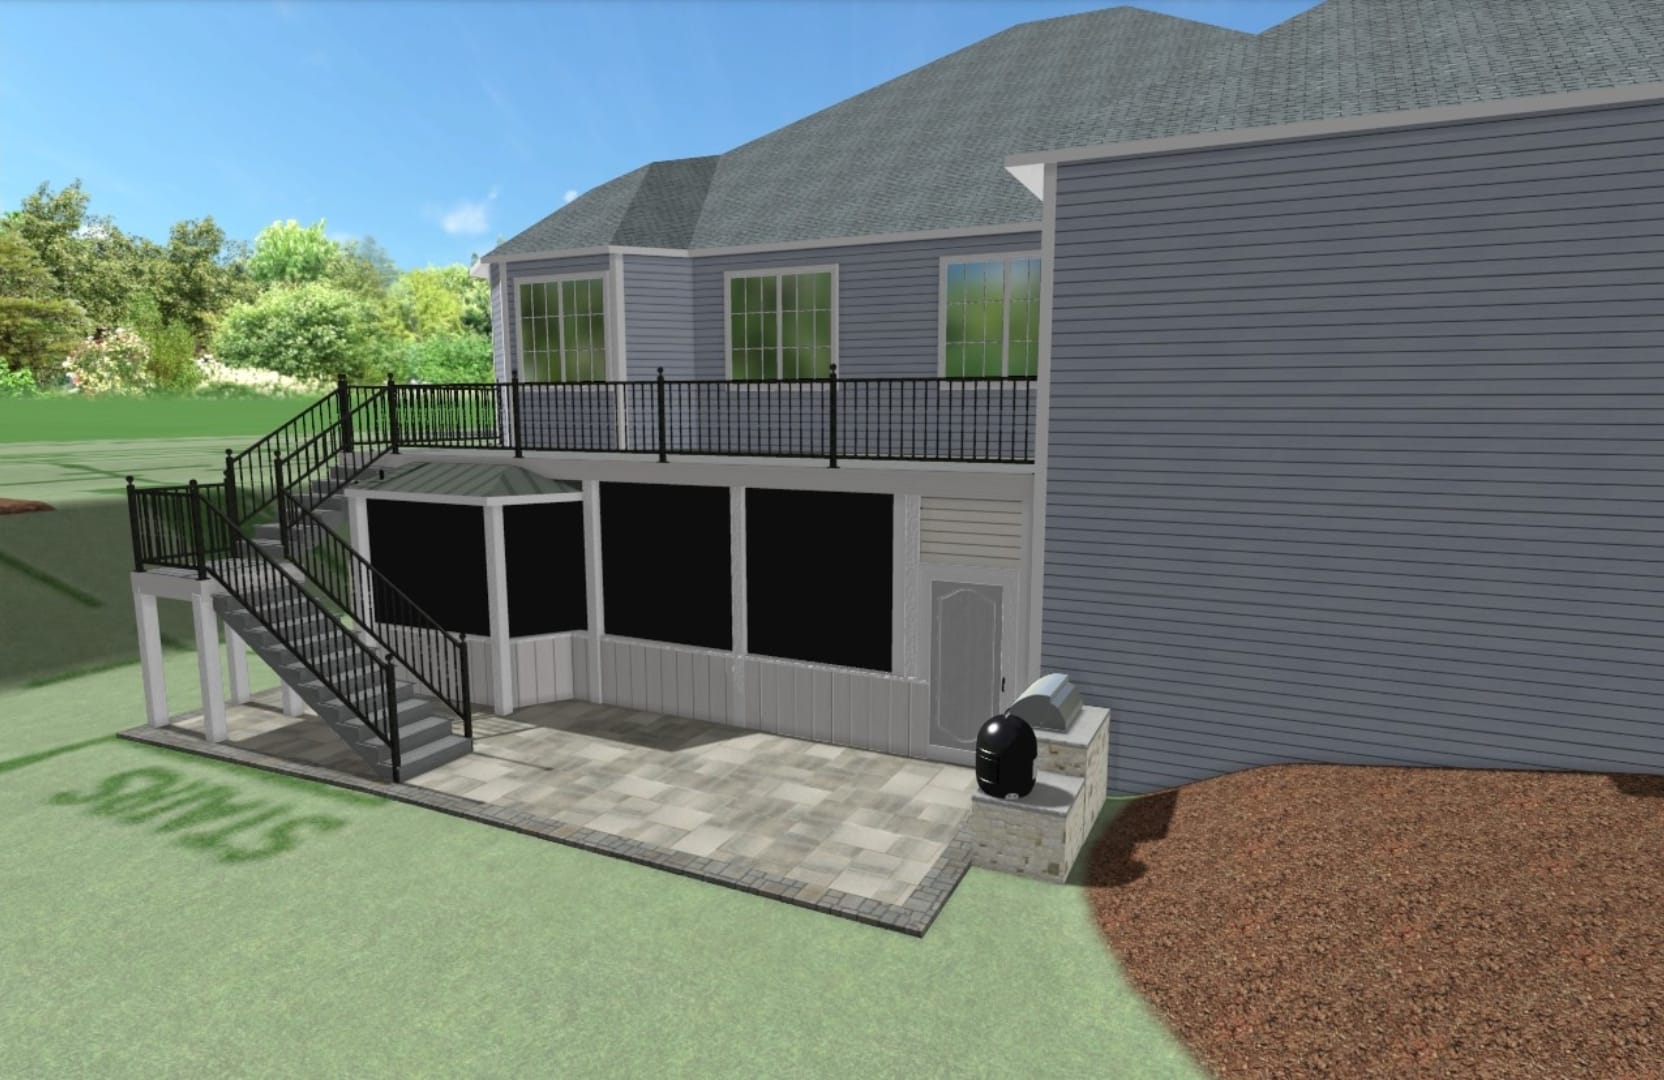 Deck and Patio Design Rendering by Sugar Hill Outdoors